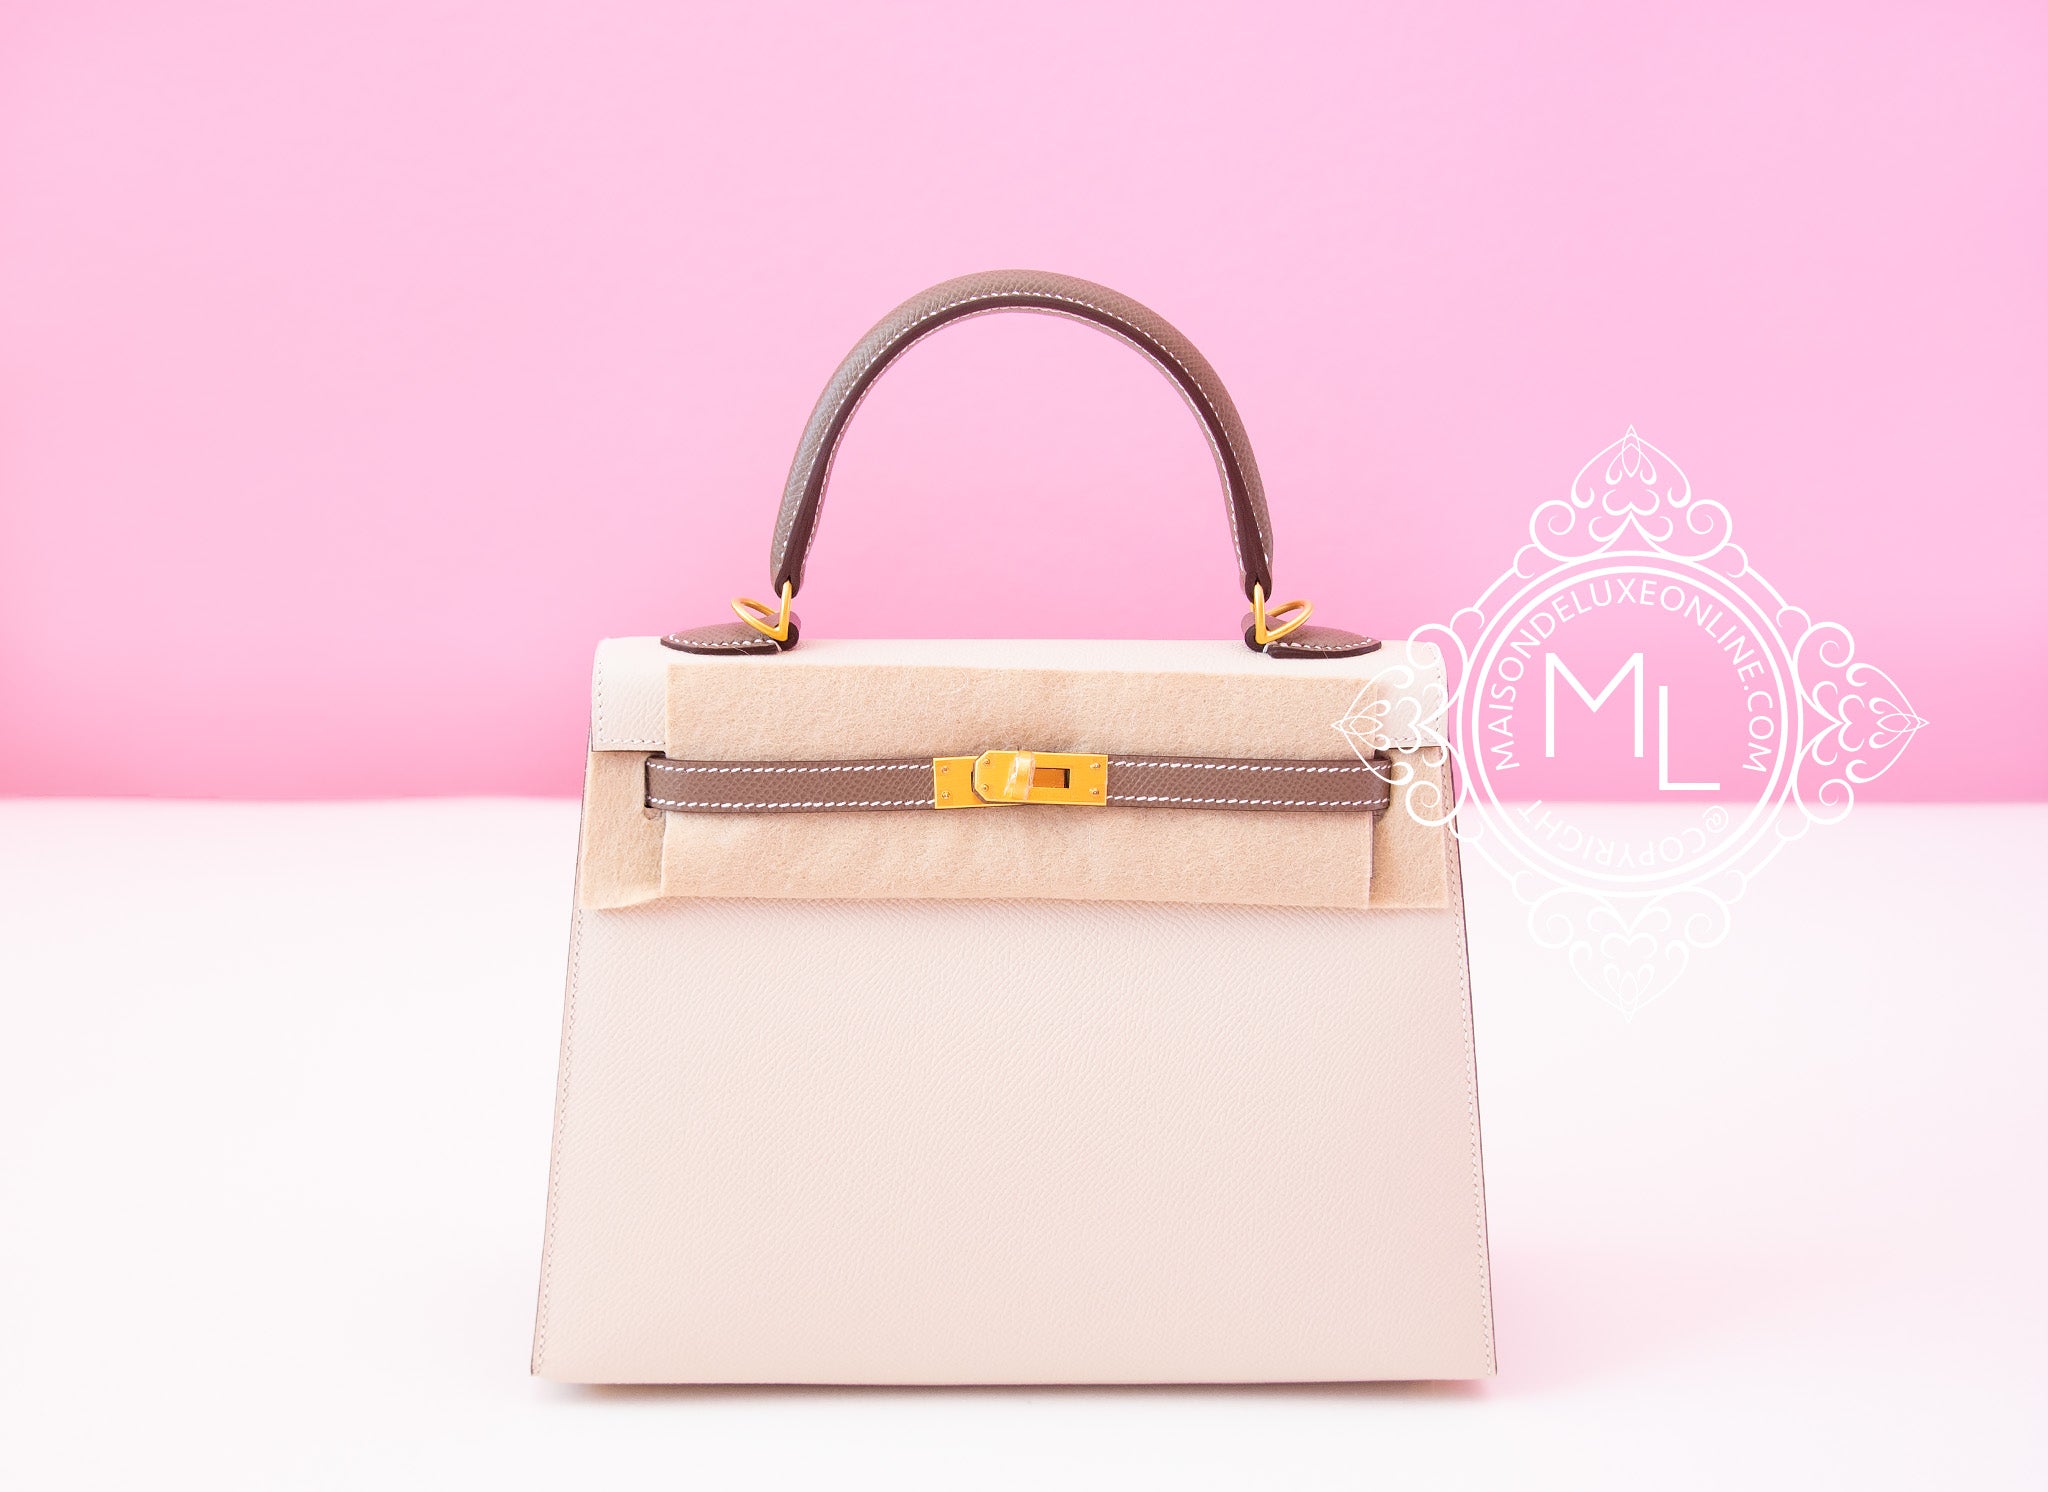 About Hermes - SOLD! Hermes kelly 25 special order Etoupe + craei